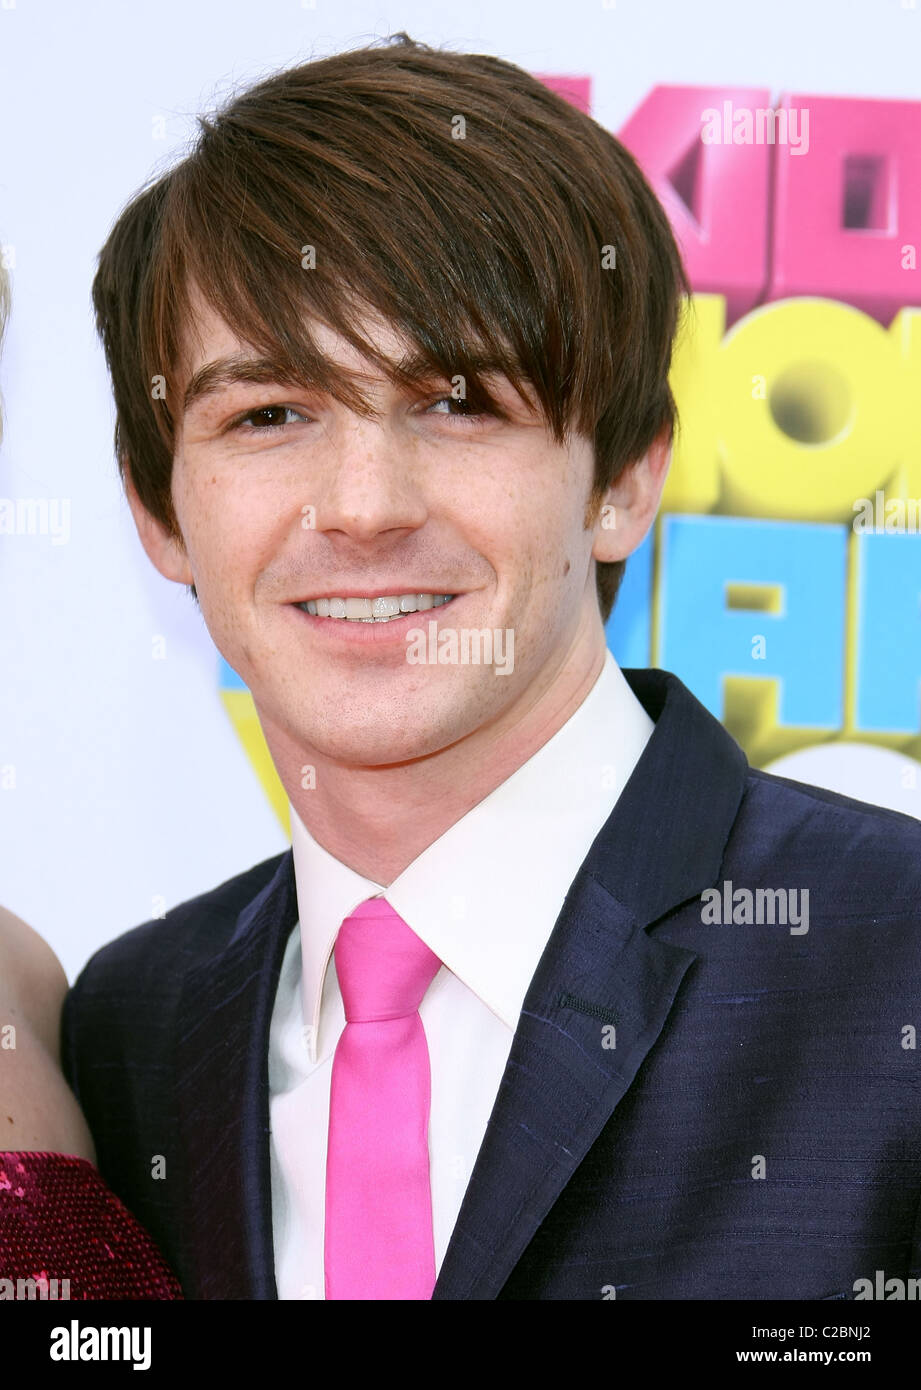 DRAKE BELL NICKELODEON'S 24TH ANNUAL KIDS CHOICE AWARDS DOWNTOWN LOS ANGELES CALIFORNIA USA 02 April 2011 Stock Photo